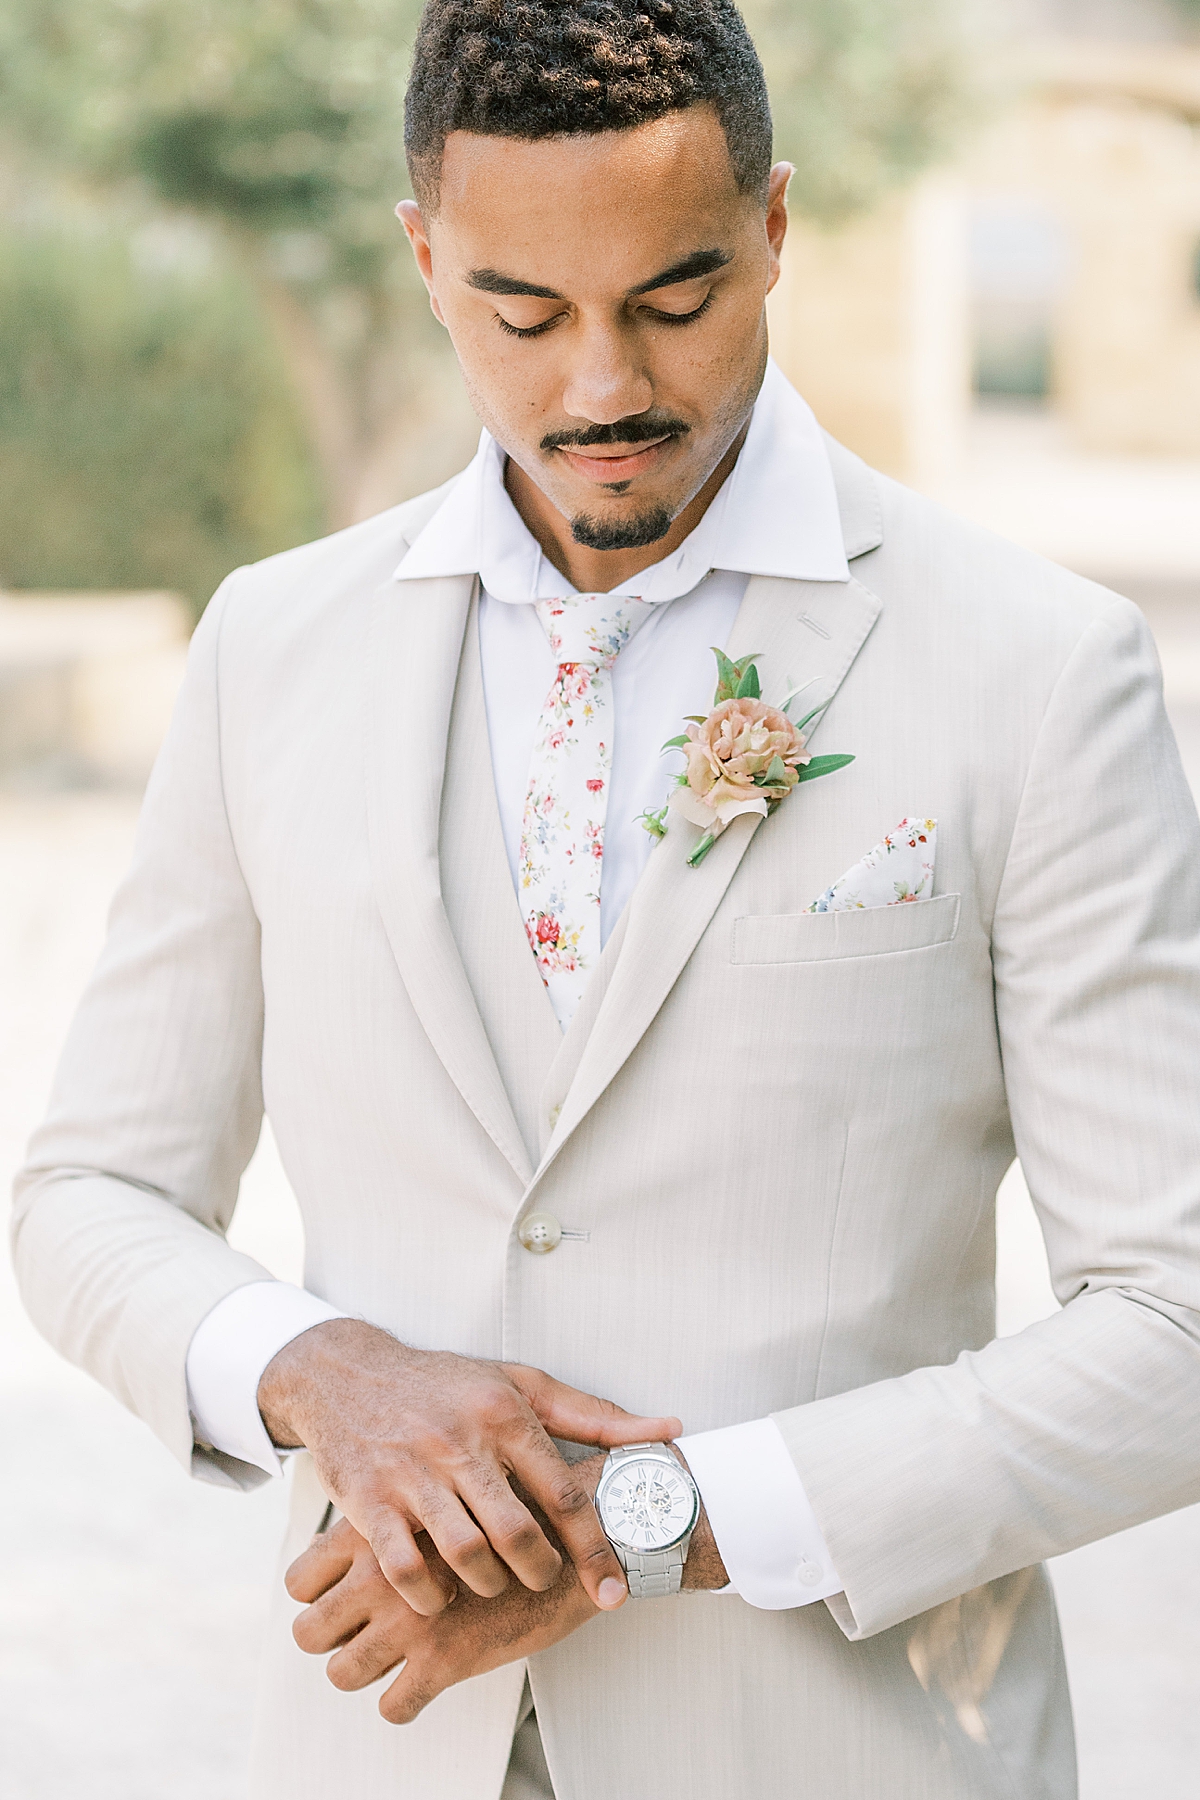 The groom smiling down at his watch at this Sunstone Villa Wedding editorial.